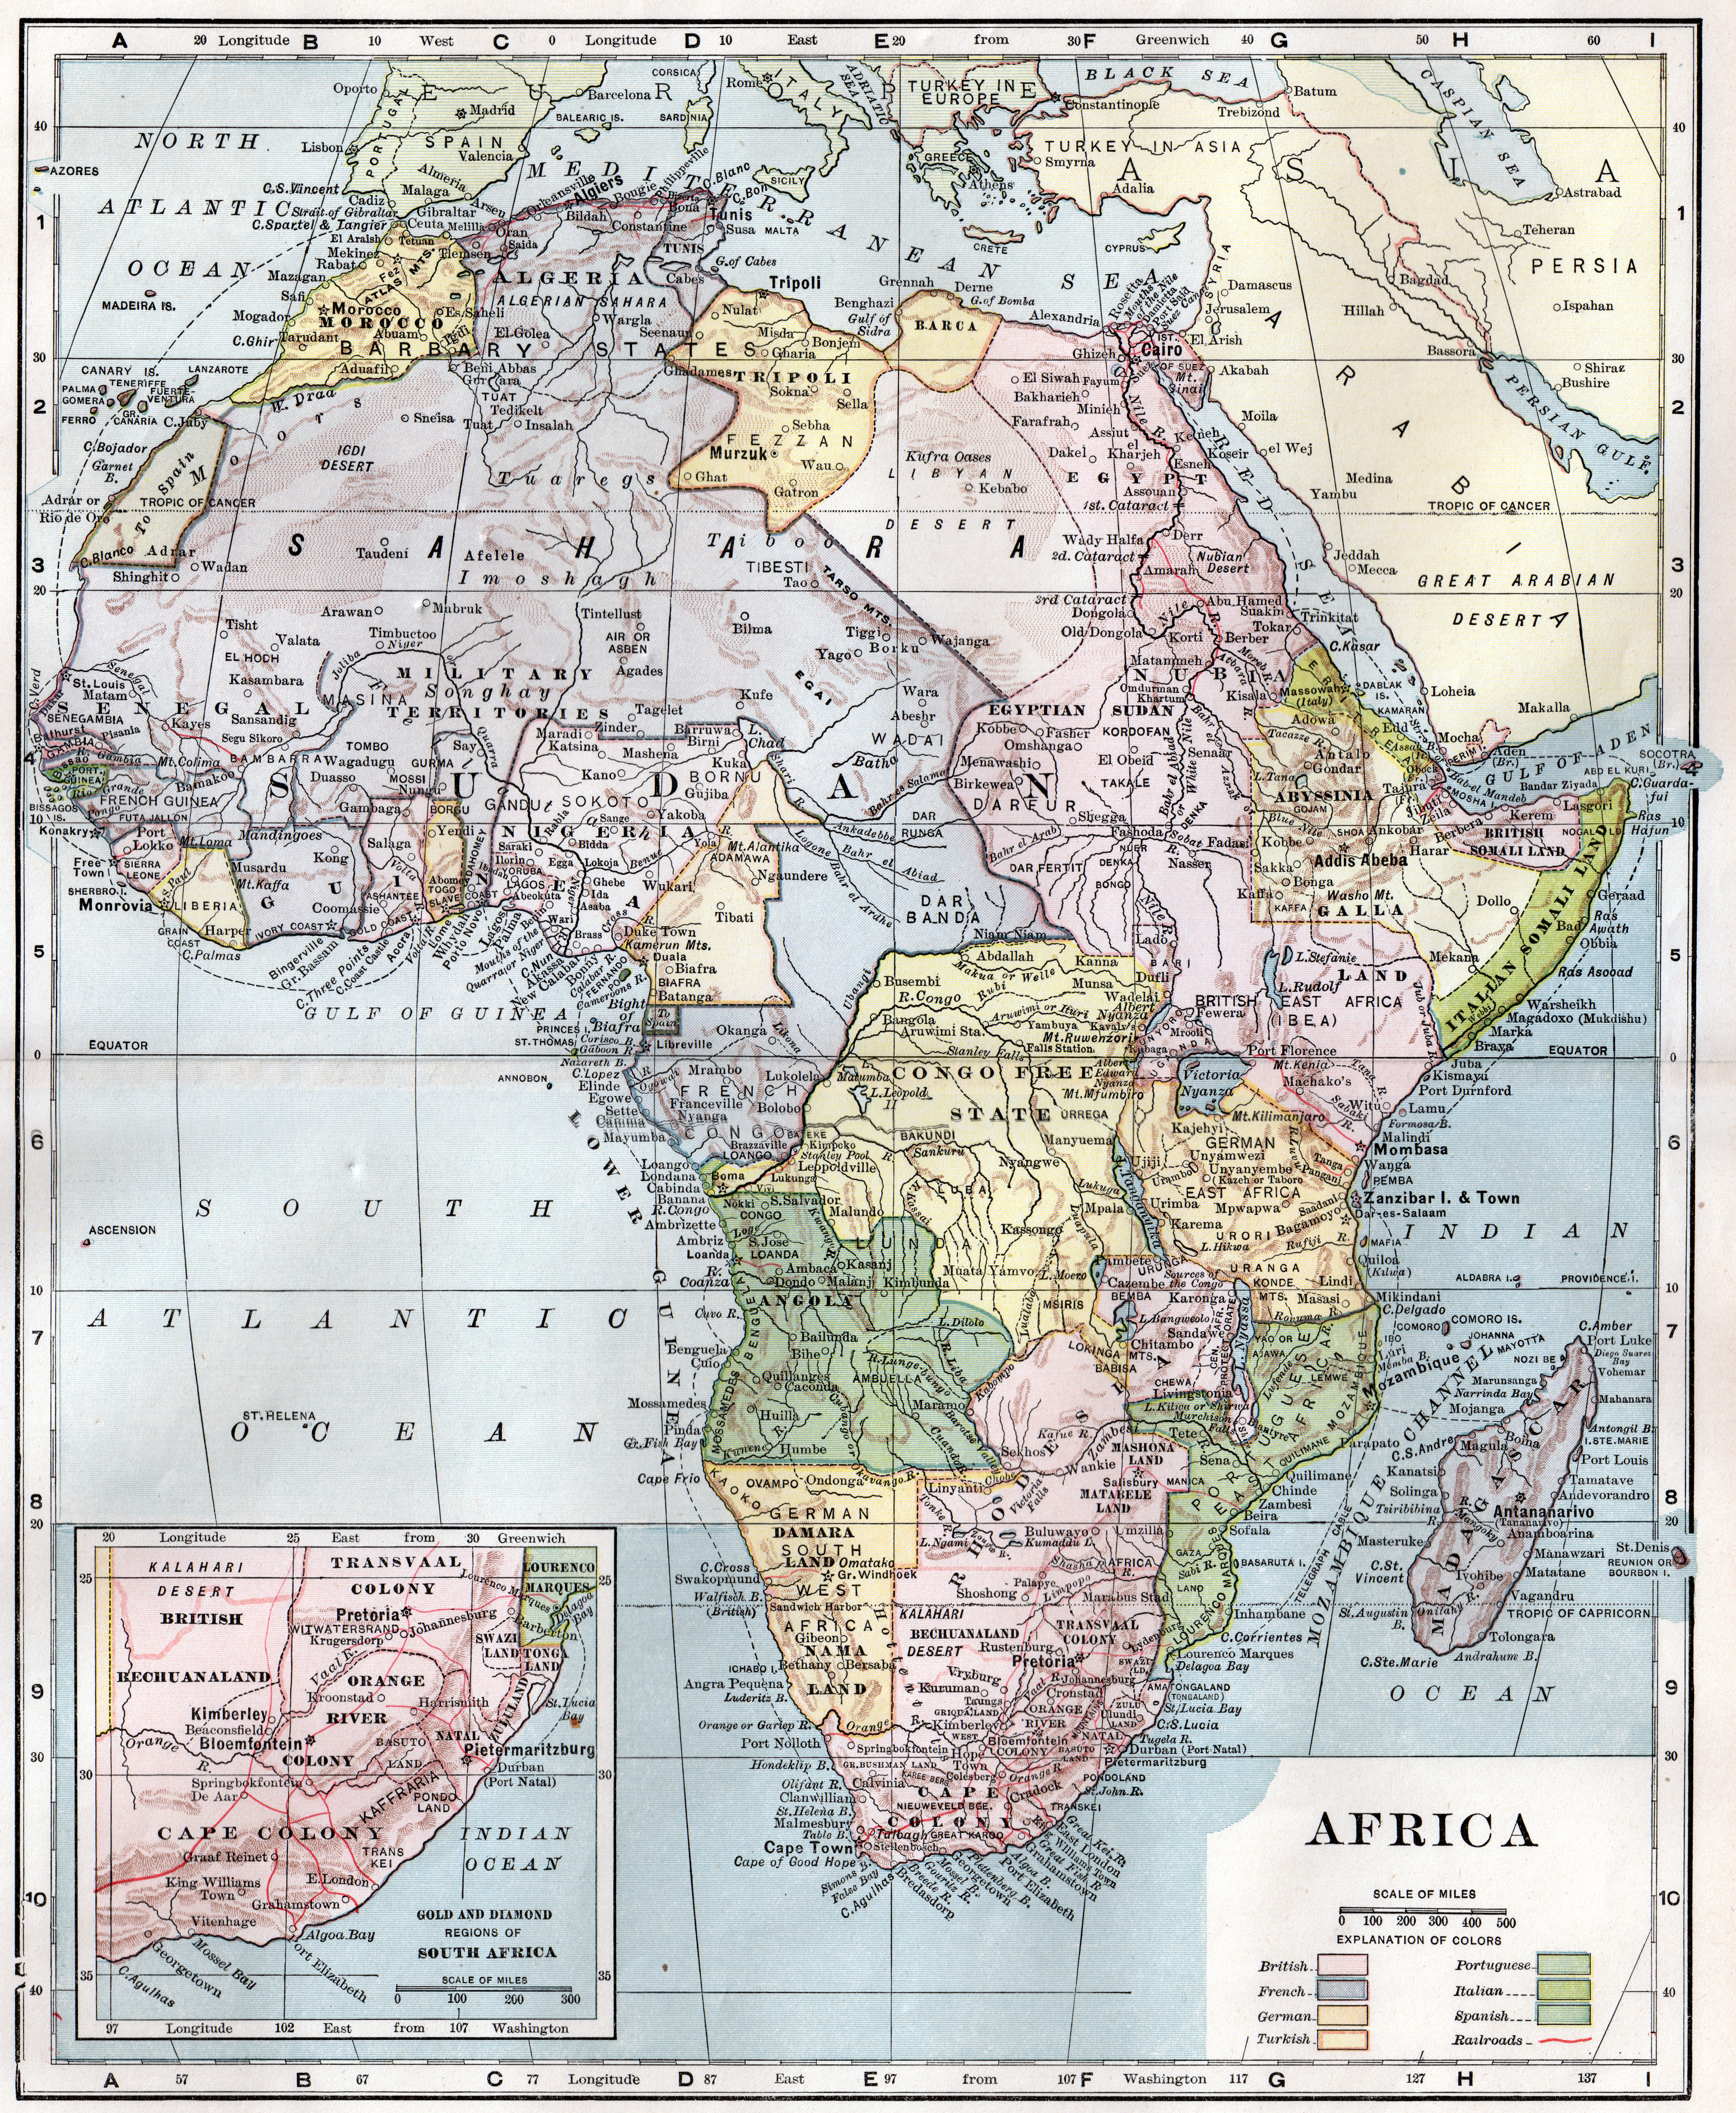 This is a map of Africa showing British, French, Turkish, Italian, German, and Portguese territories in the early twentieth century. .